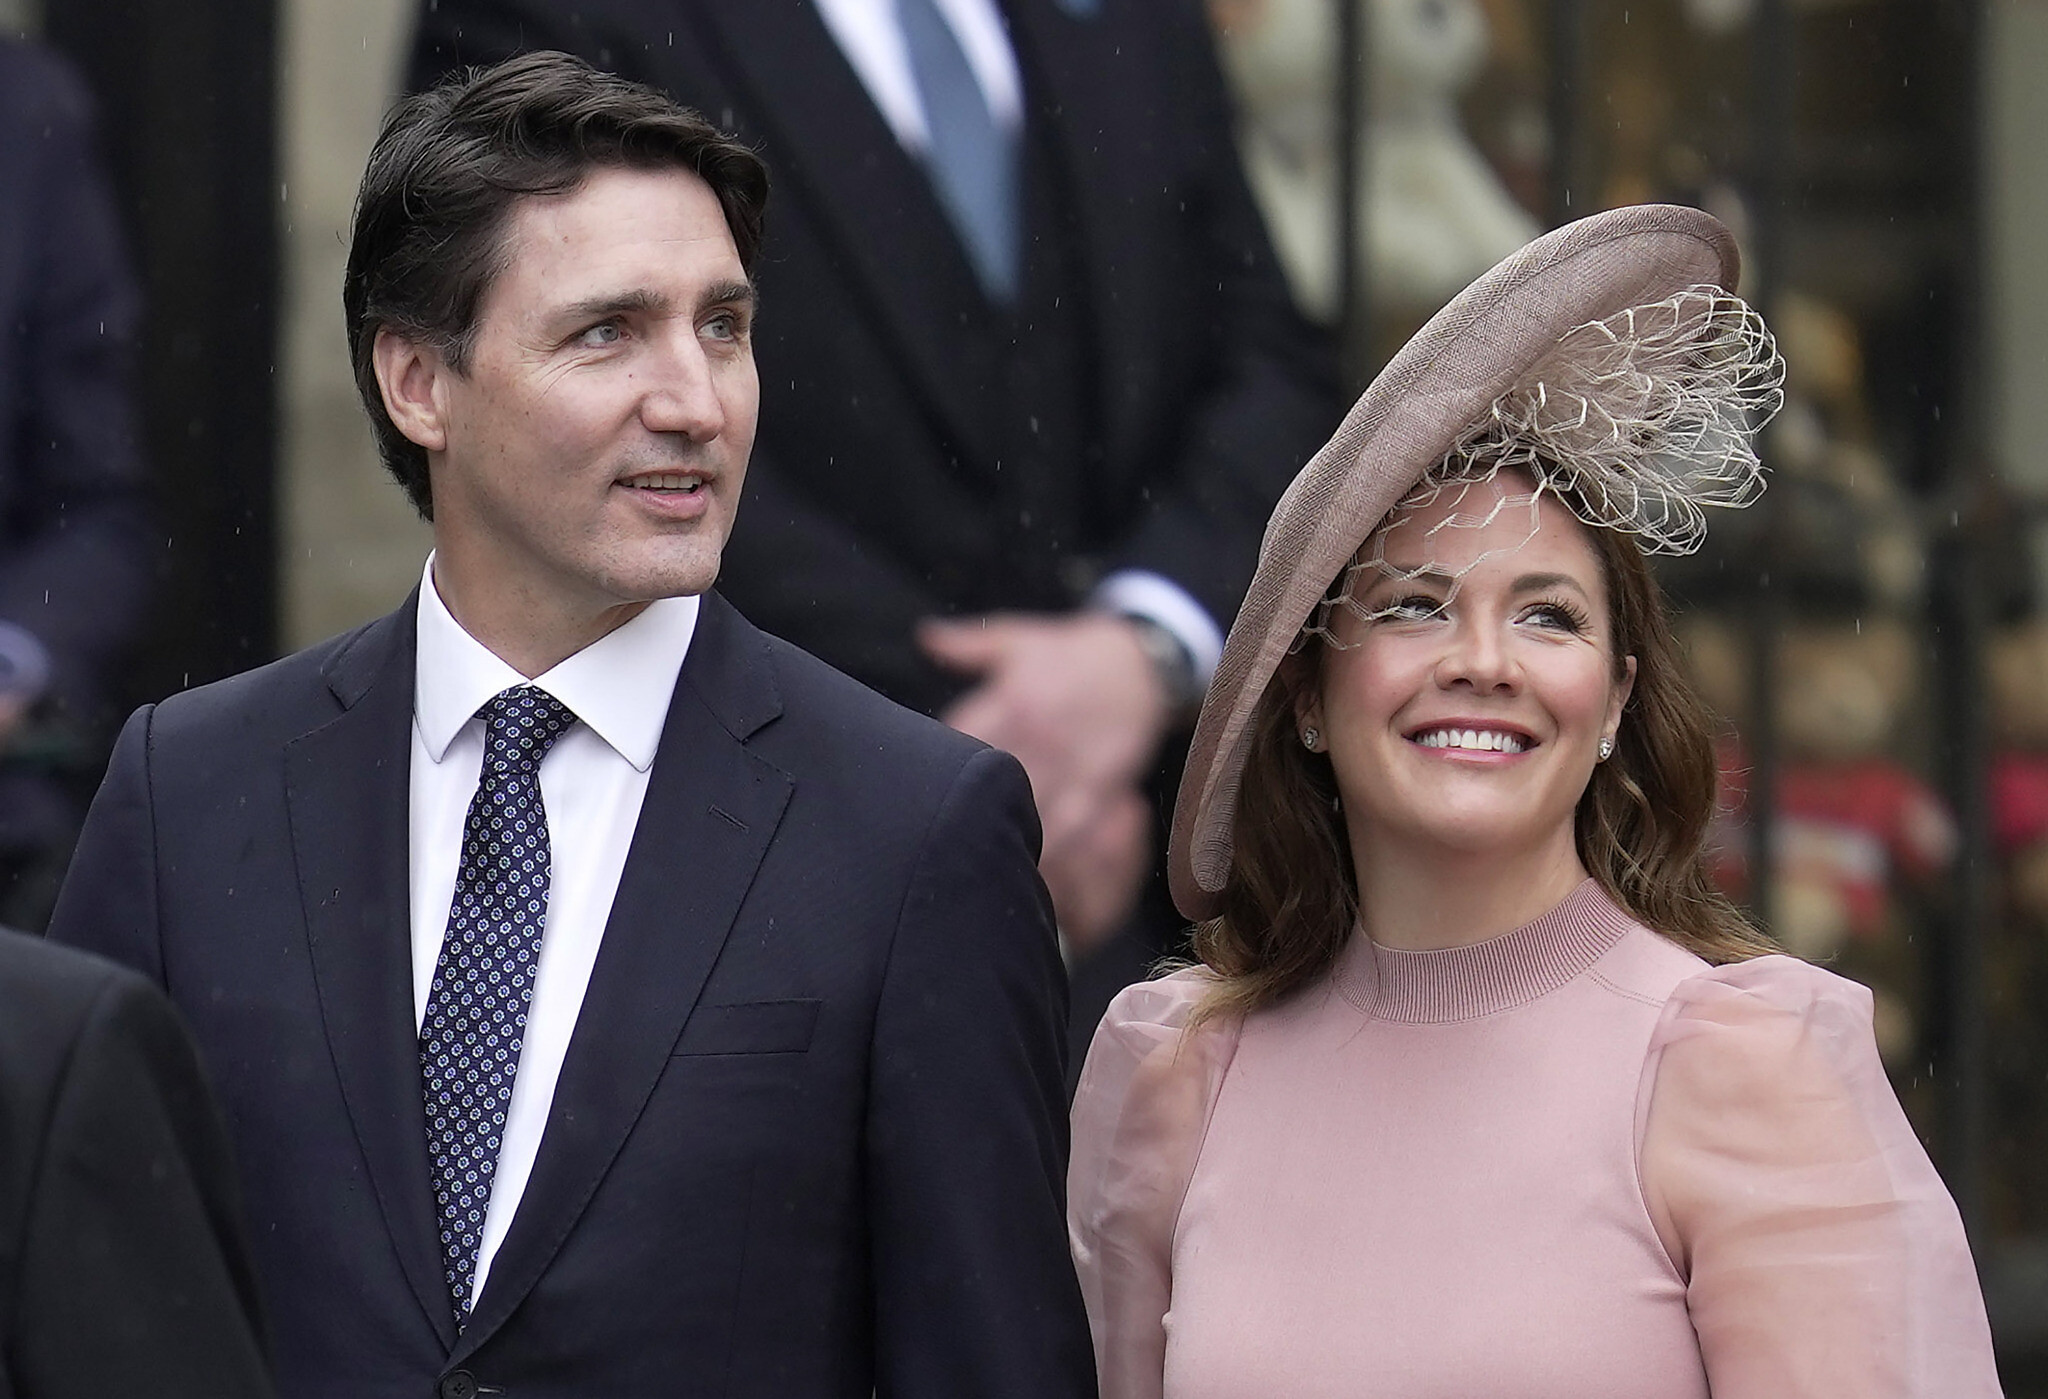 Canadian Pm Justin Trudeau And Wife To Separate After 18 Years Of Marriage The Times Of Israel